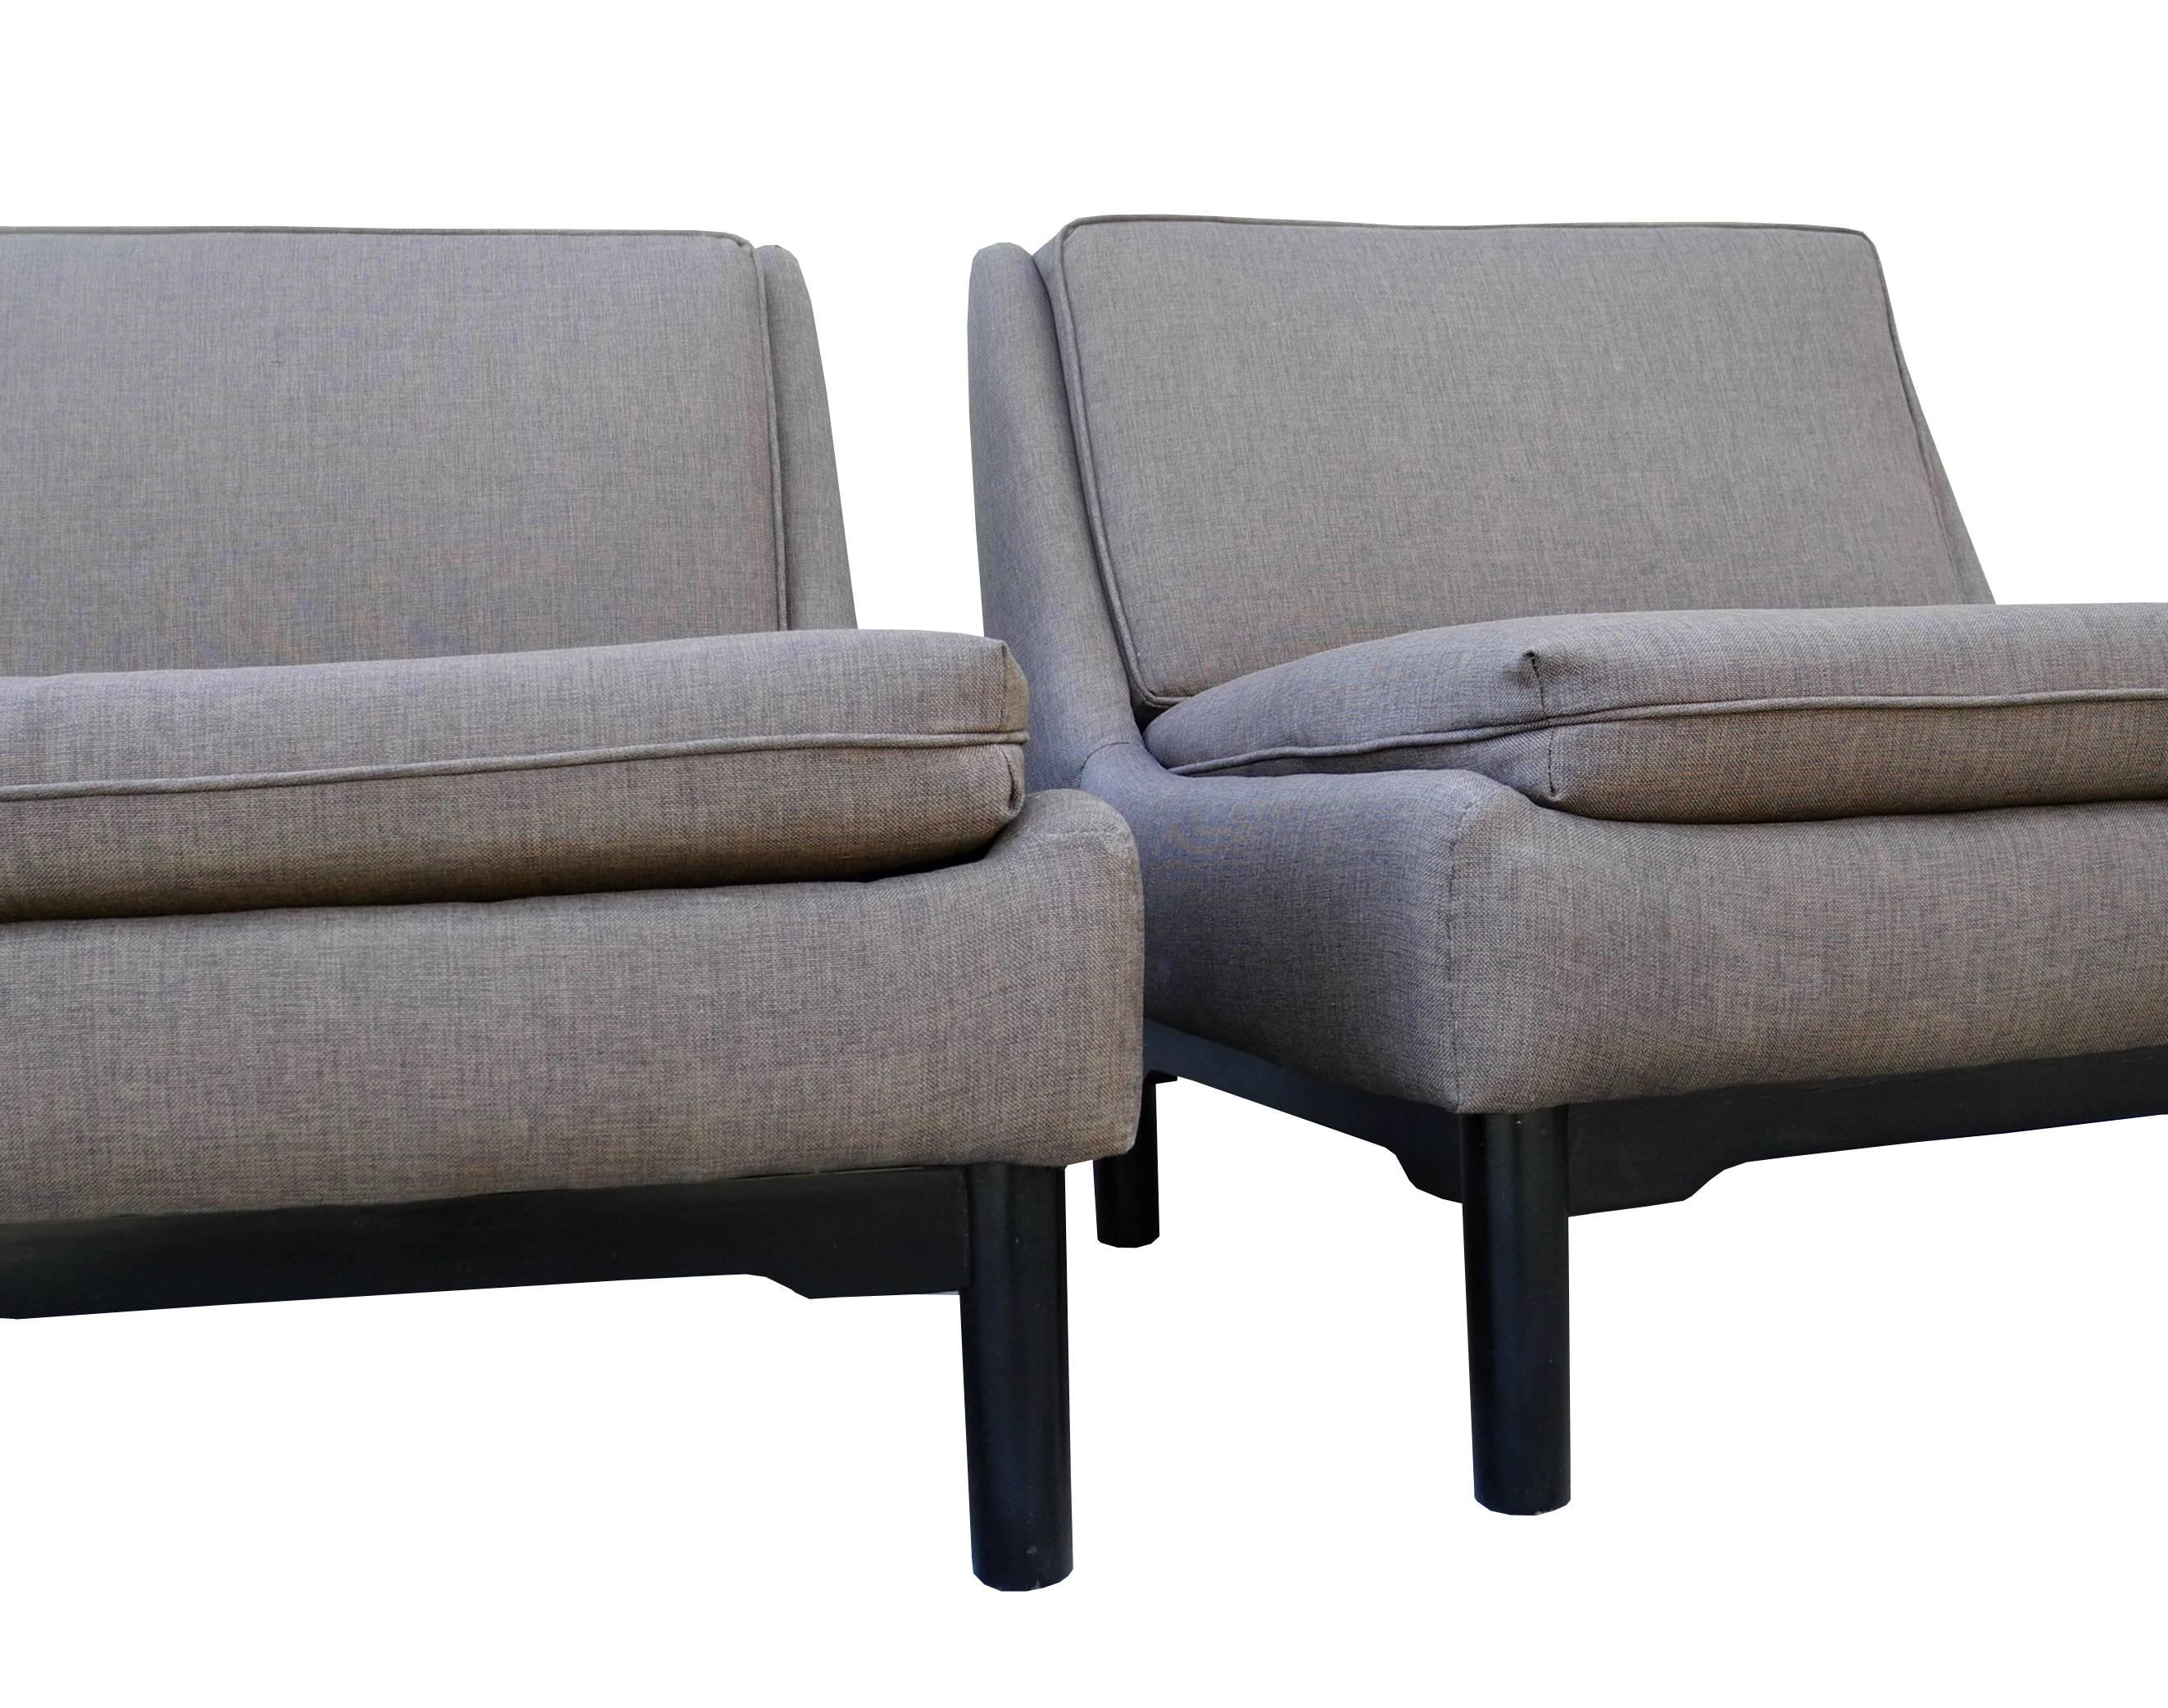 Pair of Mid-Century Modern Upholstered Linen Slipper Chairs by Widdicomb For Sale 1